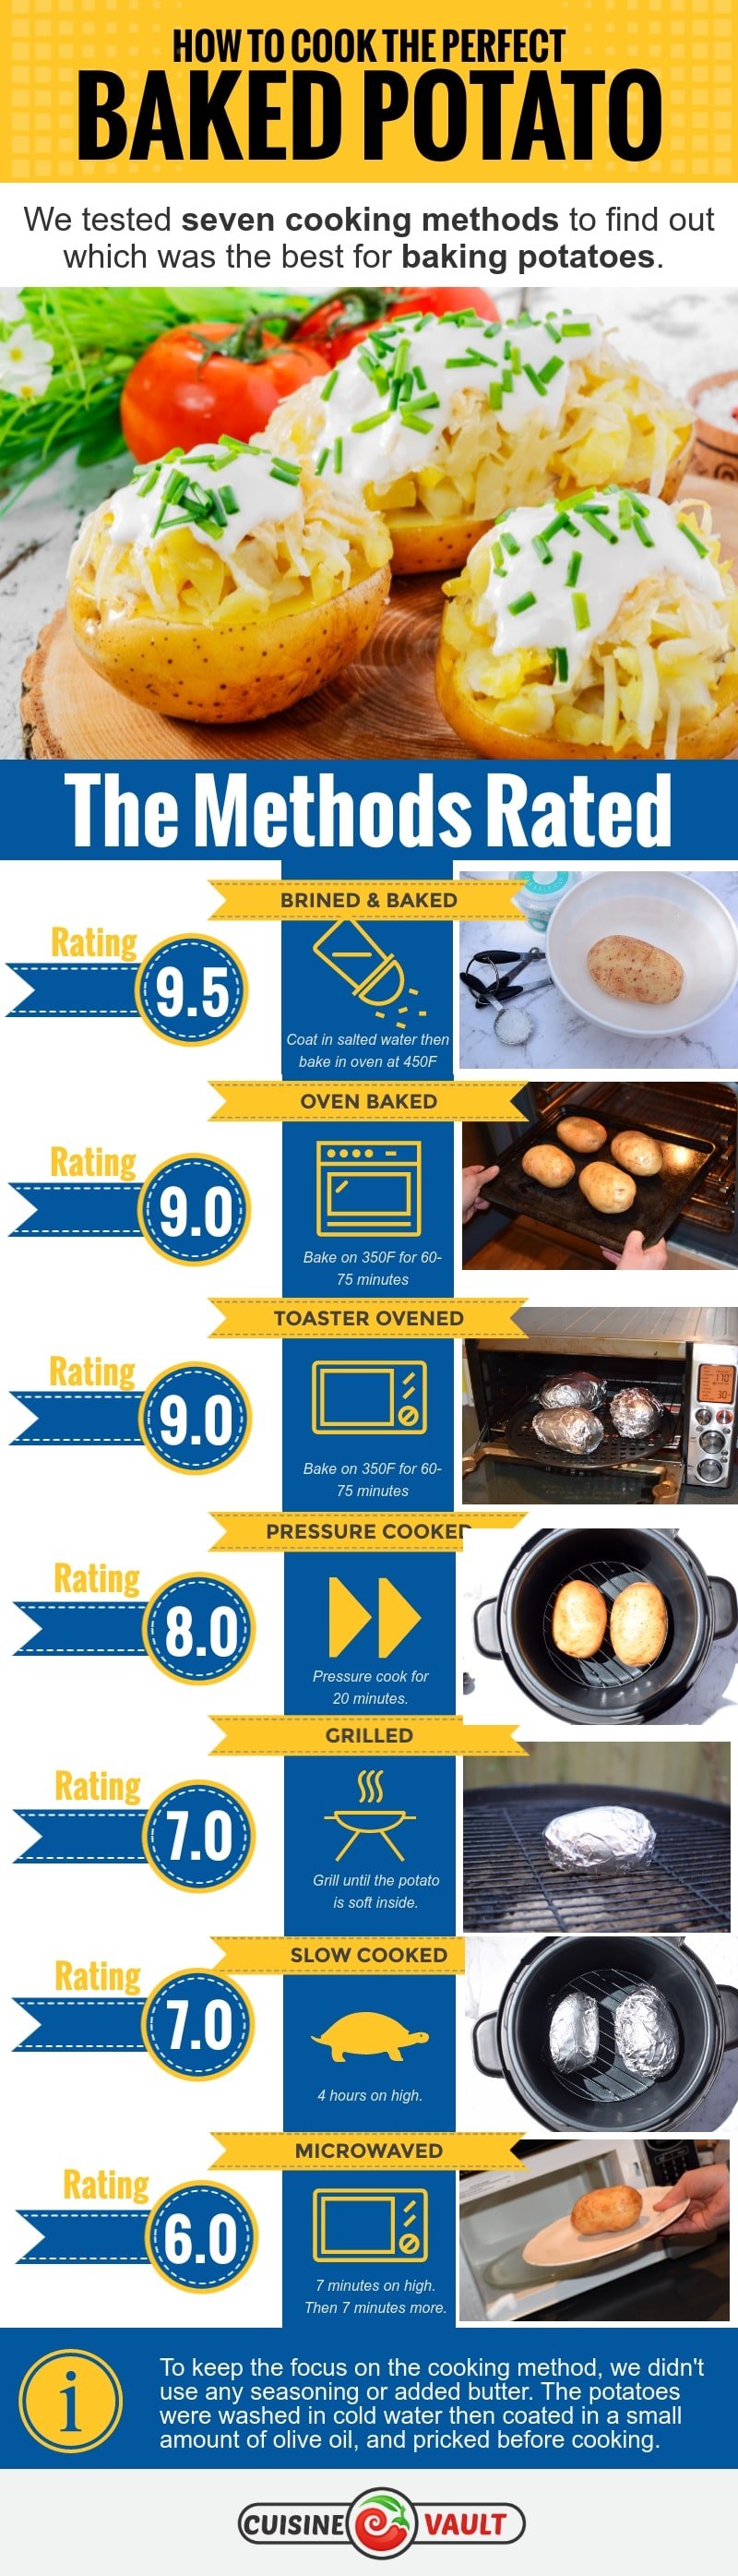 Infographic showing best methods for baking potatoes